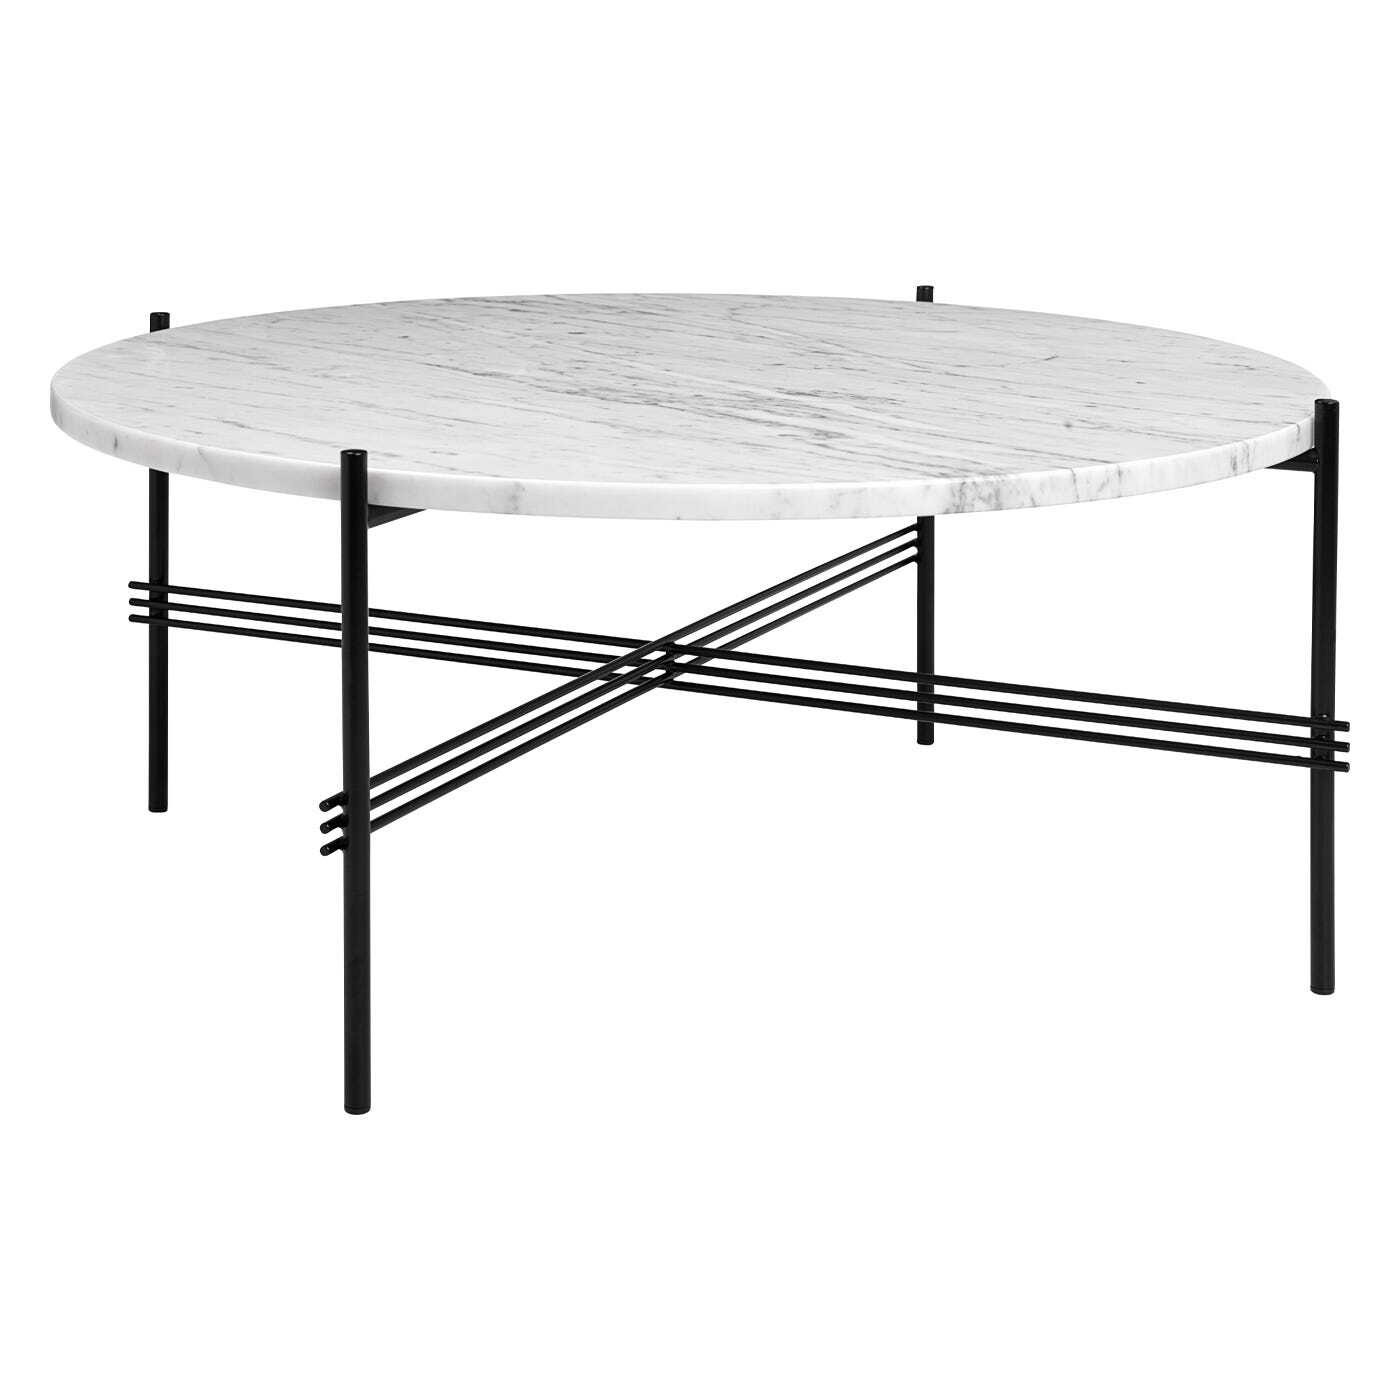 Gubi TS Coffee Table Large in White Carrara Marble - image 1